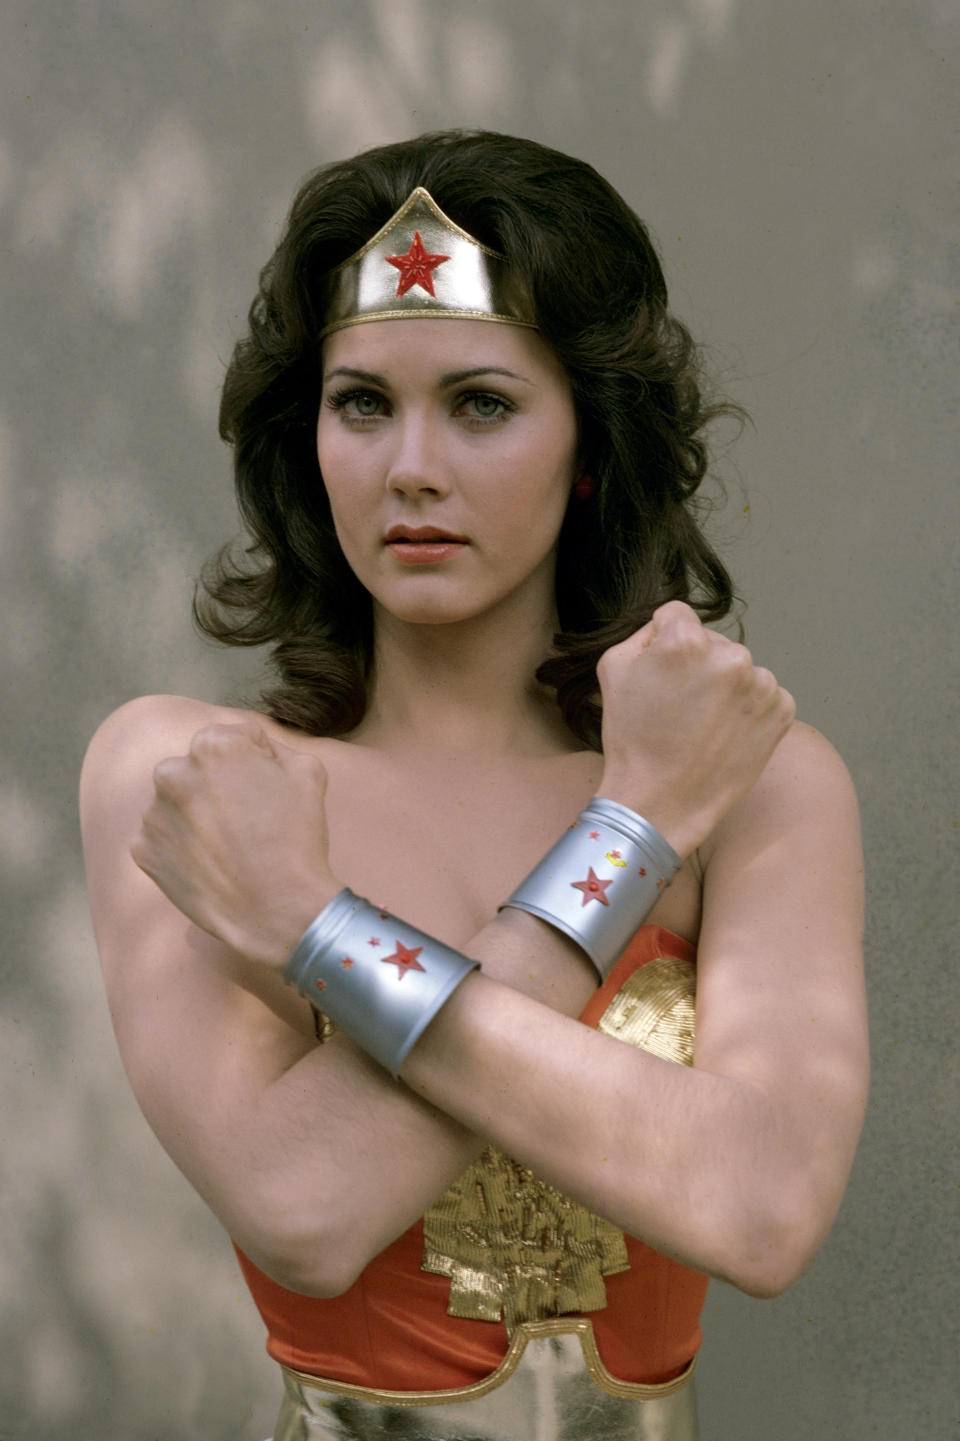 Carter played Wonder Woman on the 1970s TV show of the same name. (Photo: Walt Disney Television via Getty Images Photo Archives/Walt Disney Television via Getty Images)